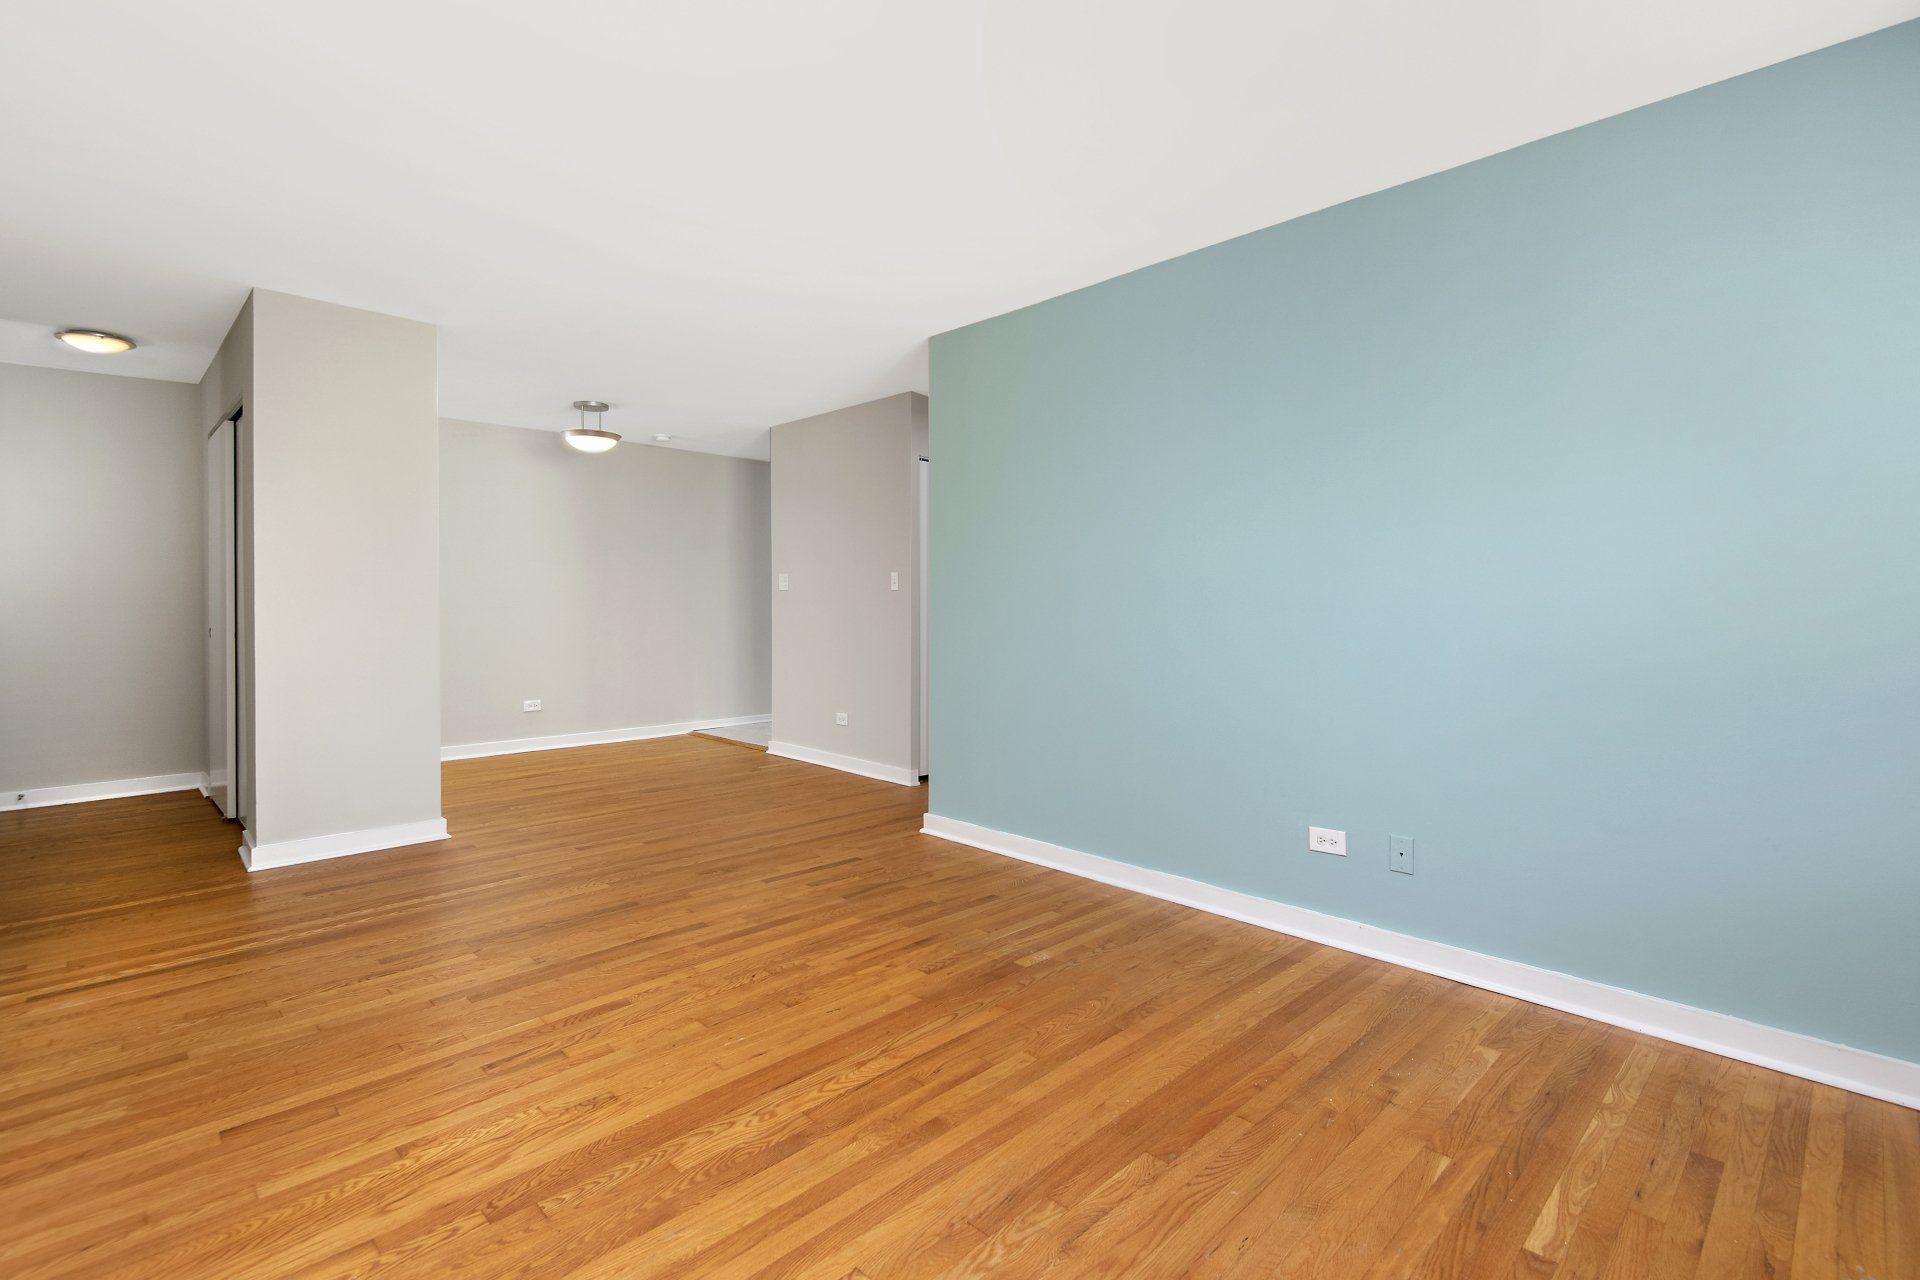 An empty living room with hardwood floors and blue walls at Reside on Pine Grove.